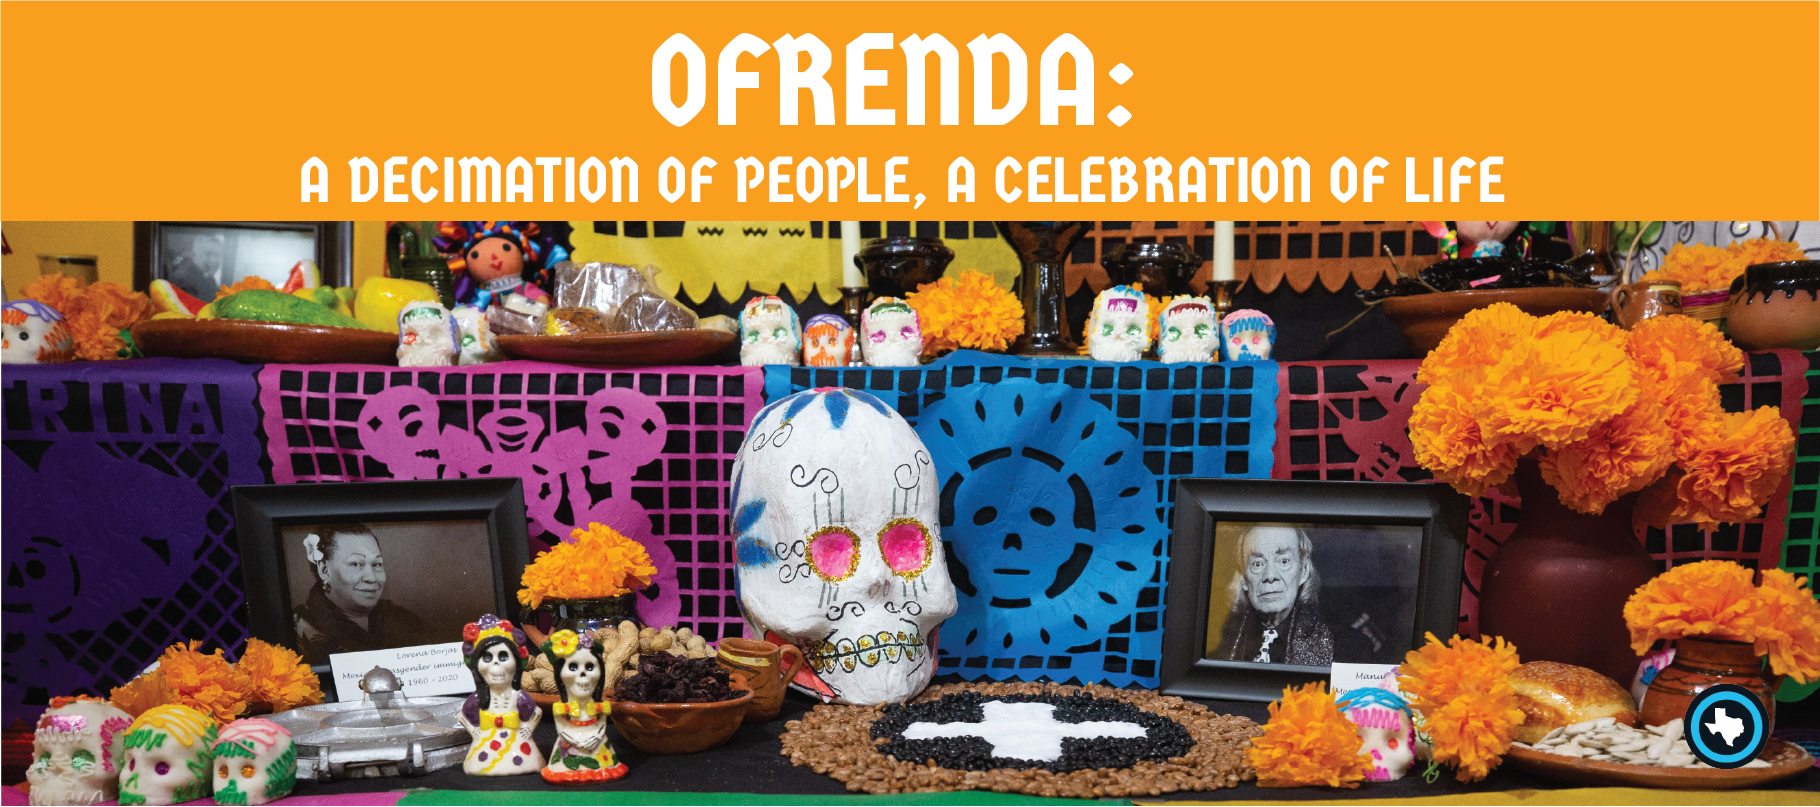 ofrenda special show banner with a montage of images from the show